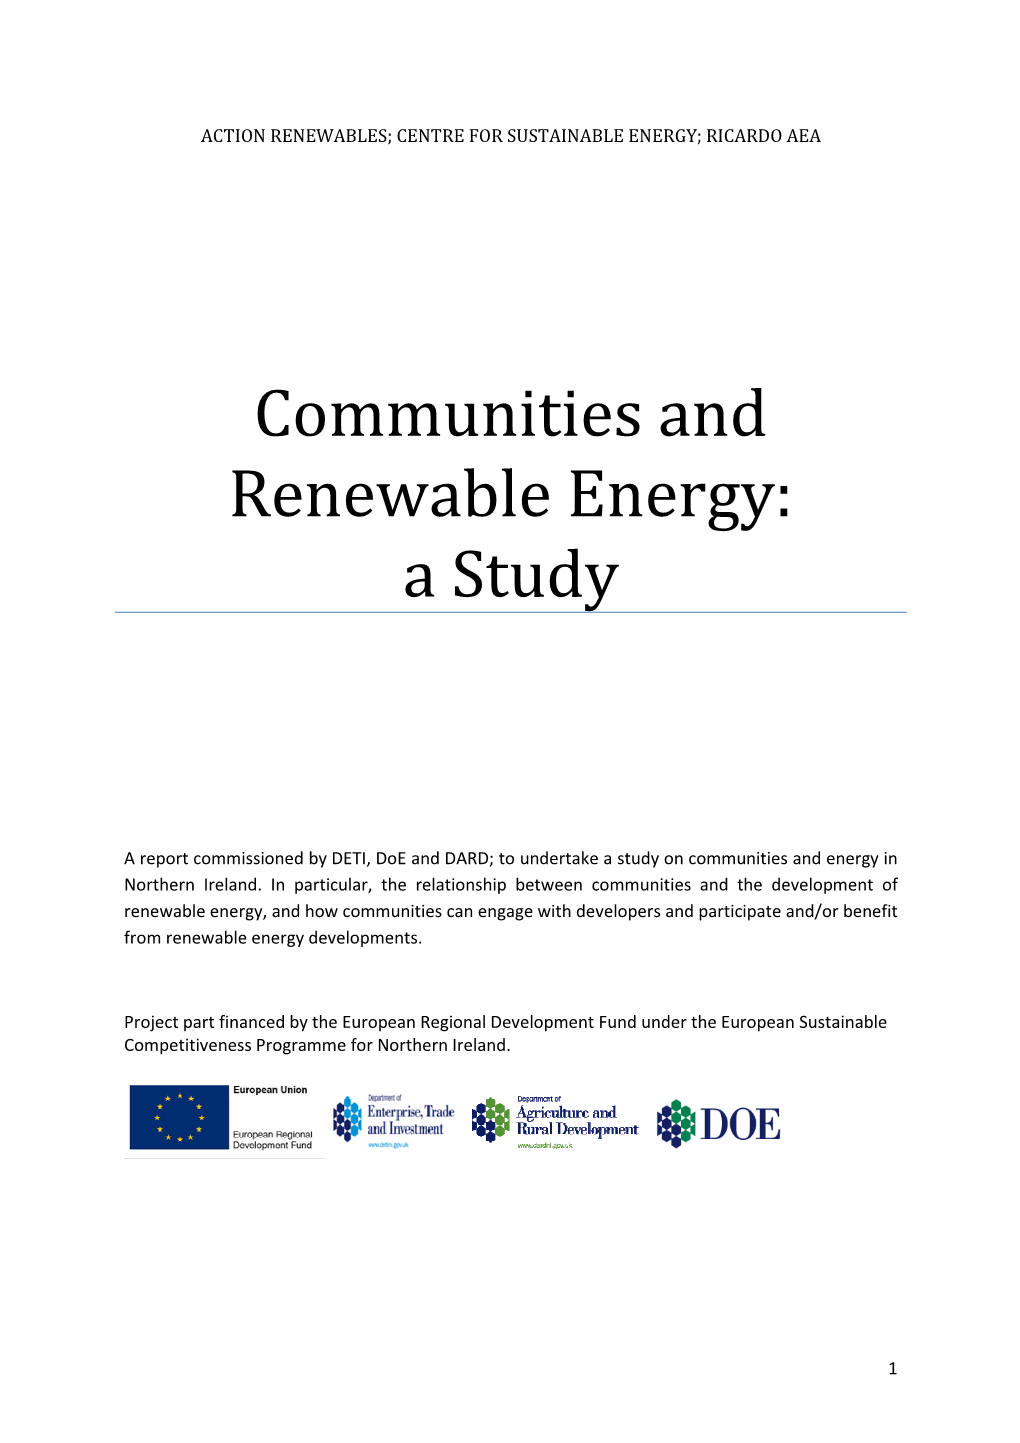 Communities and Renewable Energy: a Study